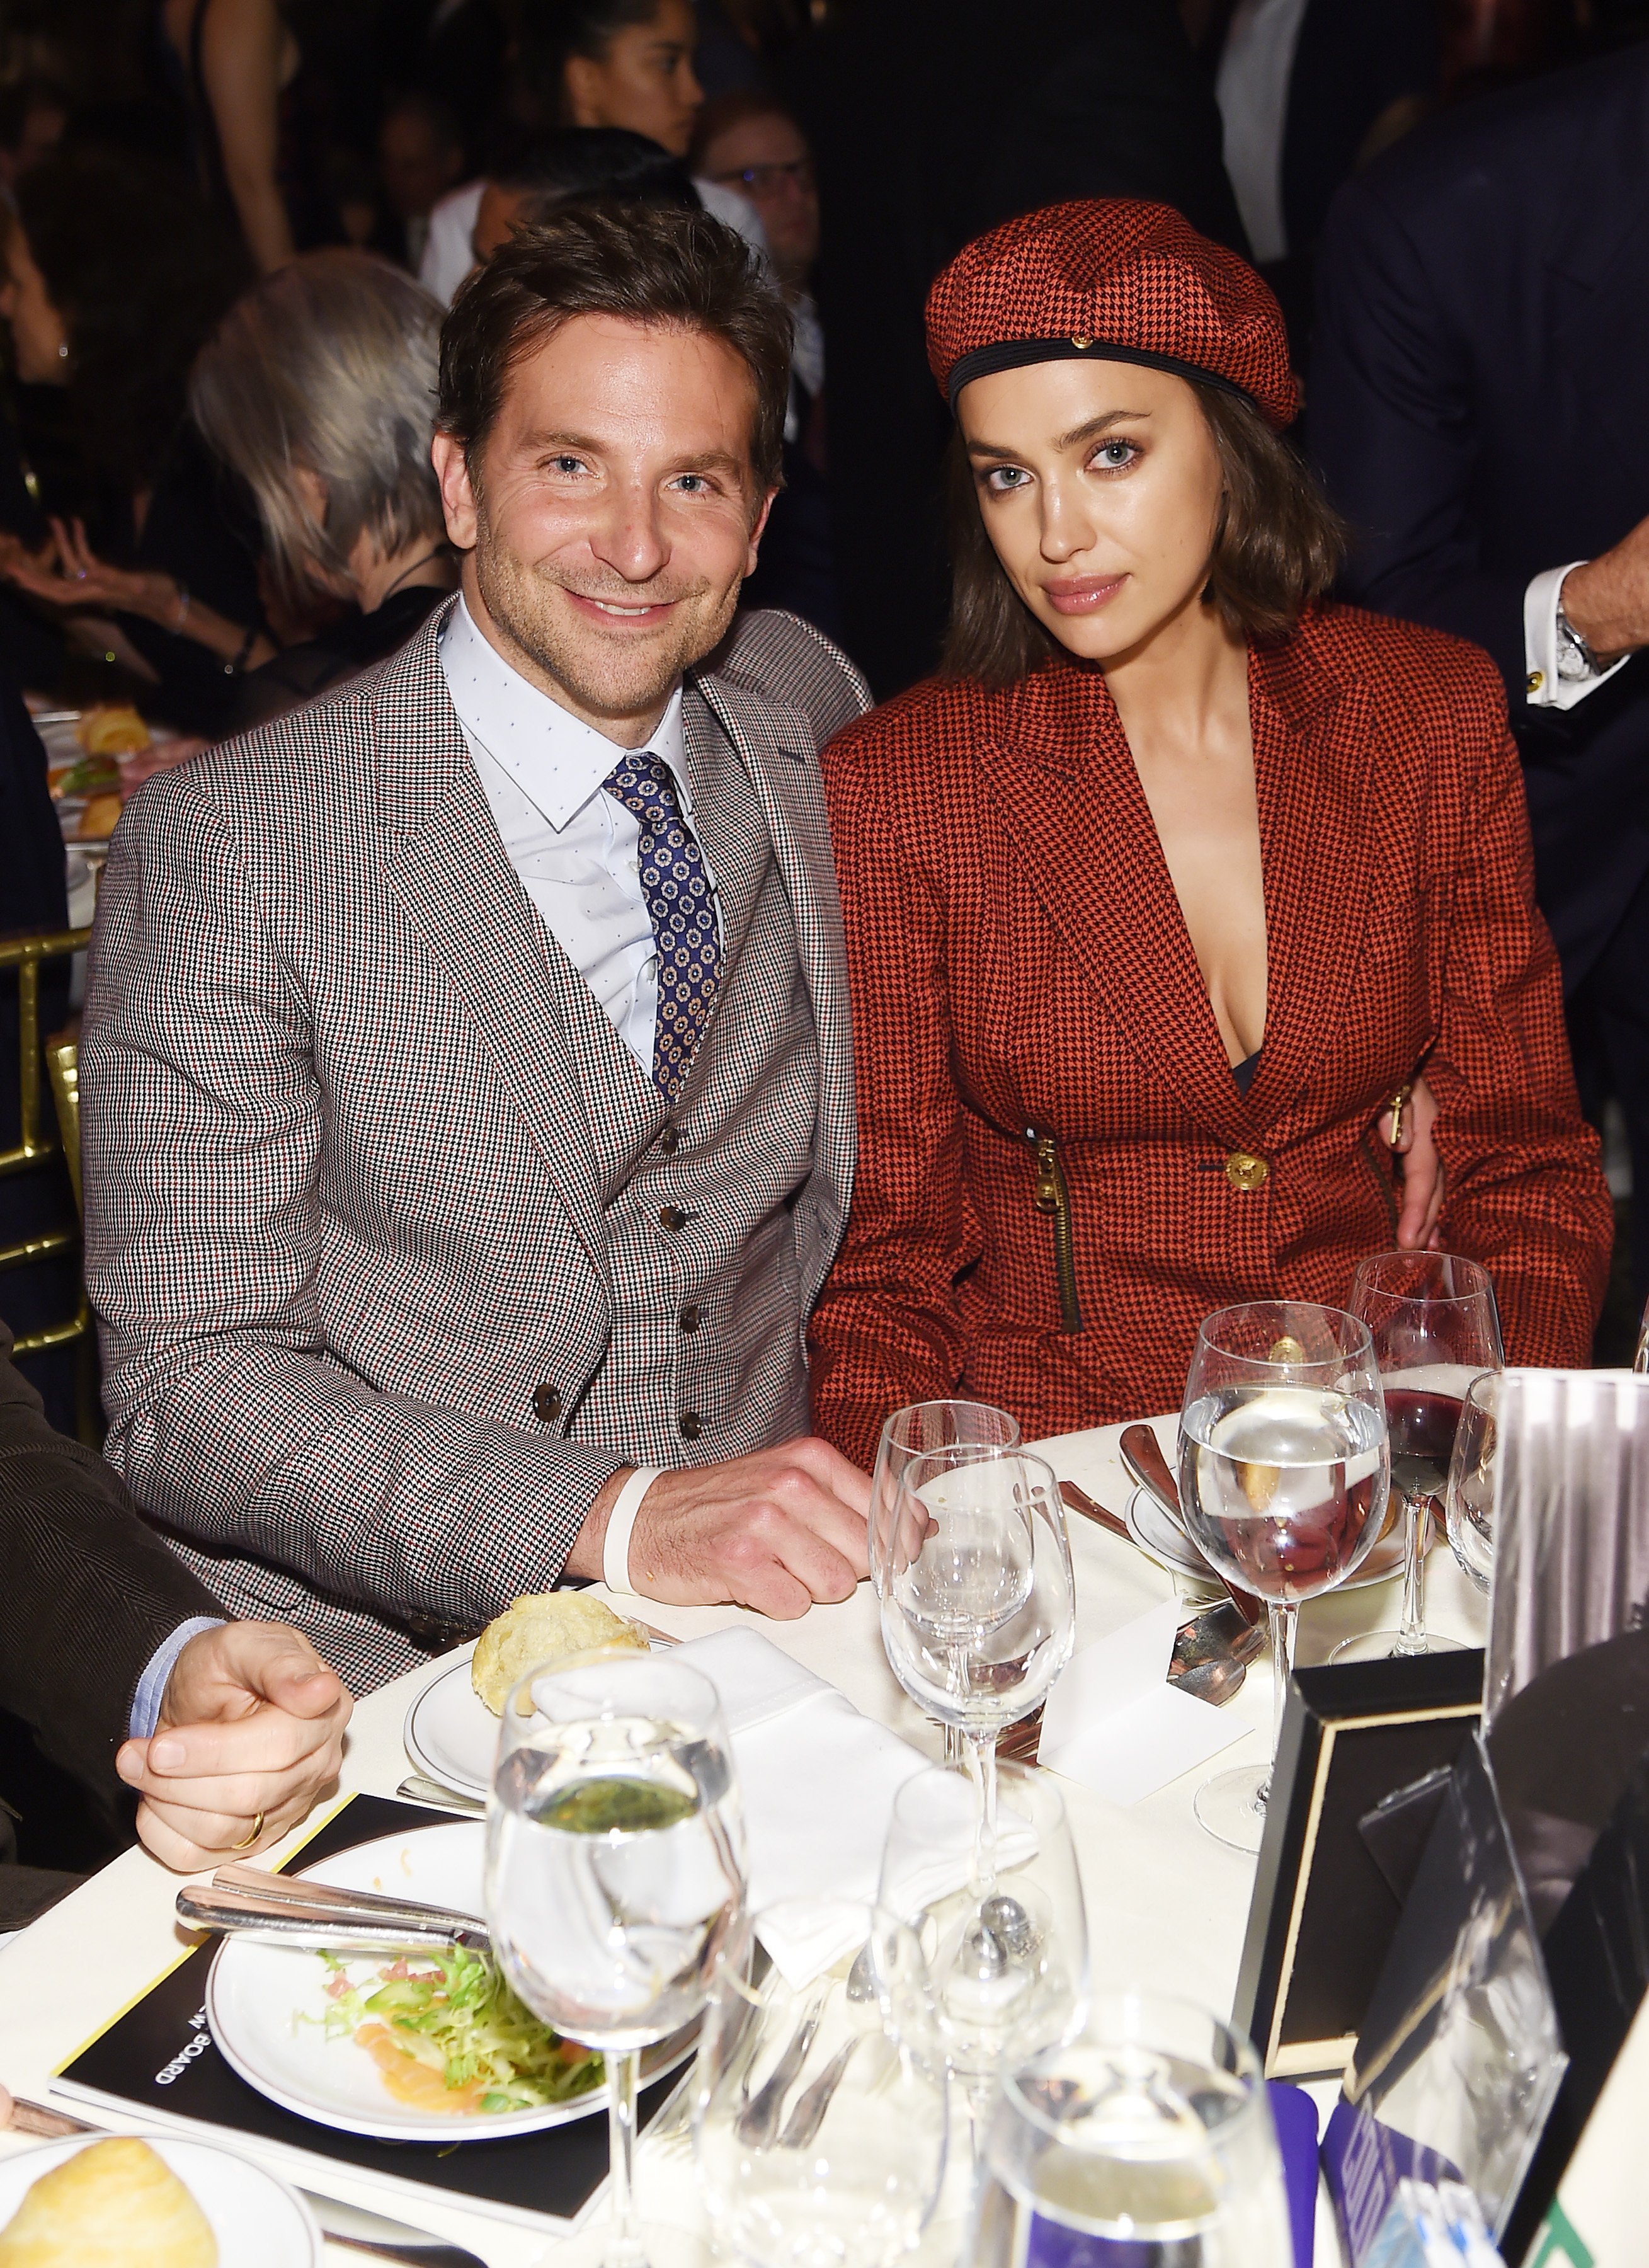 Bradley Cooper and Irina Shayk at Cipriani 42nd Street on January 8, 2019 in New York City | Photo: Getty Images